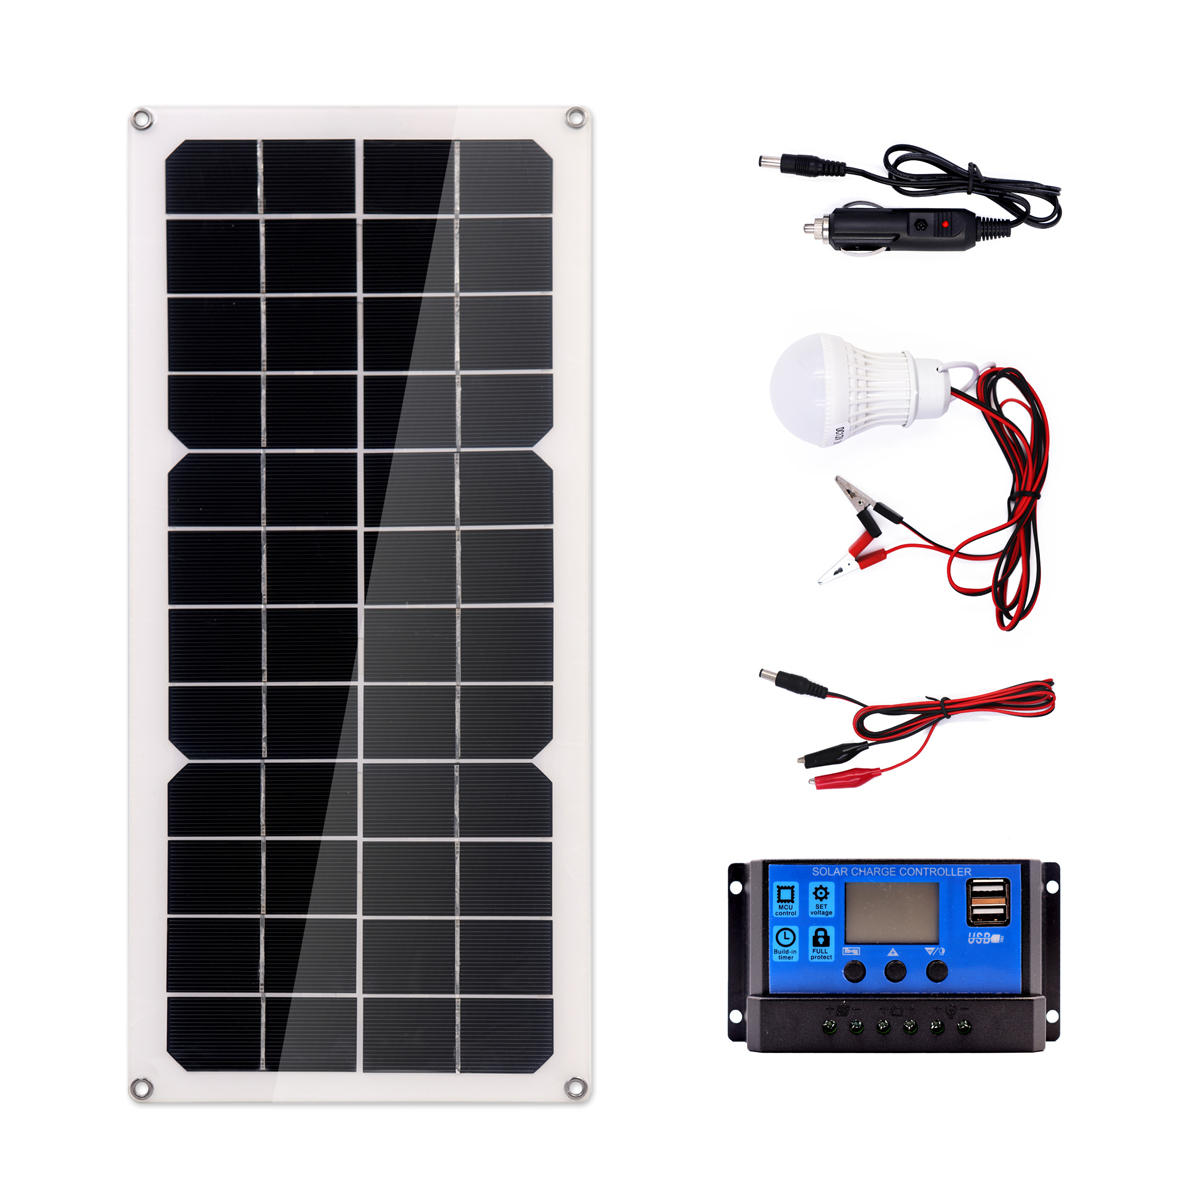 

20W Monocrystalline Silicon Solar Panel System + 10A Solar Controller + Cables Set forRoof/Camping/Tent/Backpacks